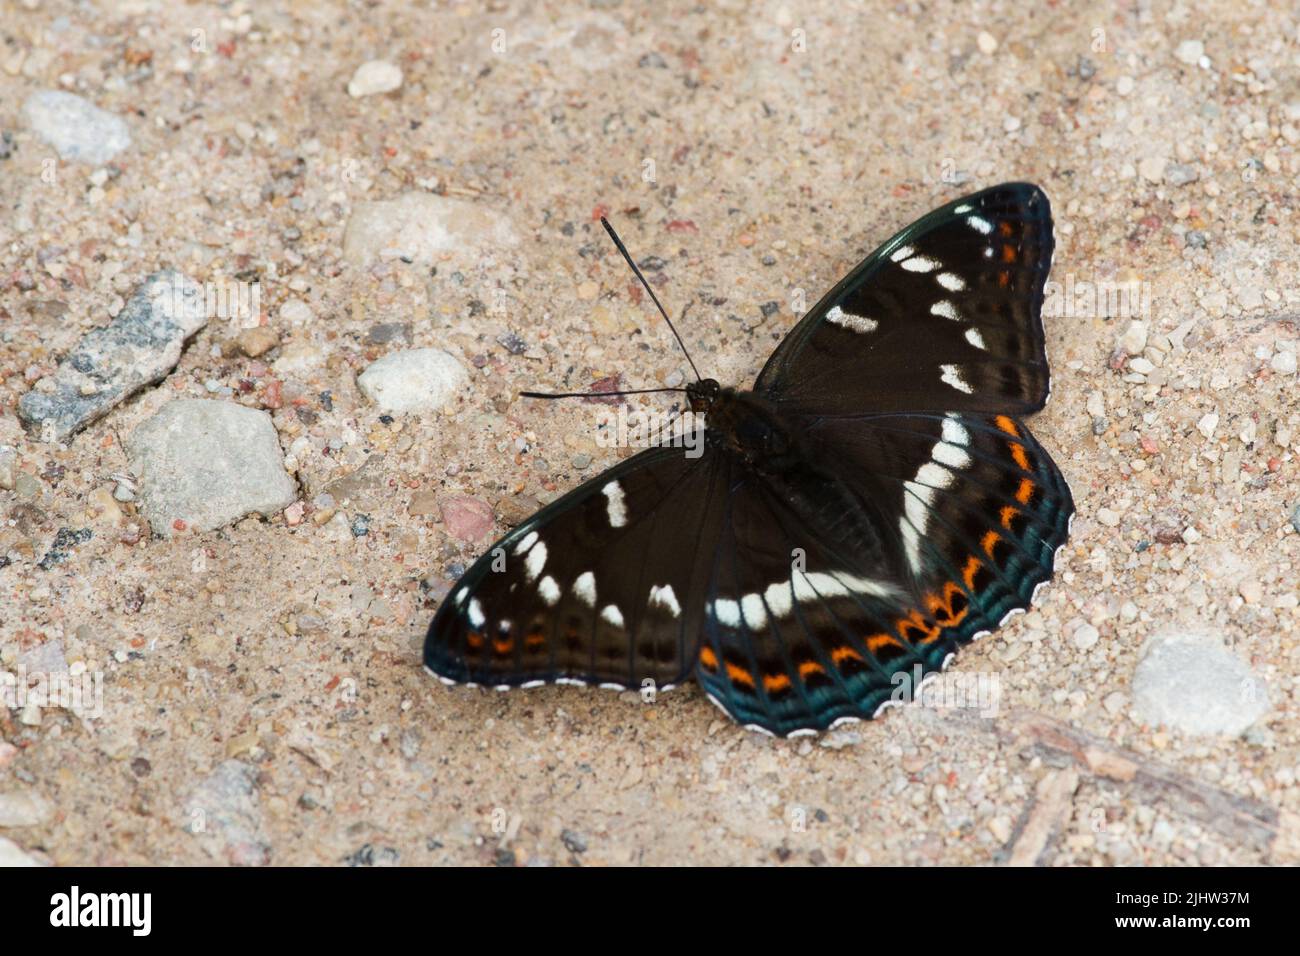 A large and dark butterfly, Poplar admiral resting on a summery dirt road in Estonia, Northern Europe Stock Photo